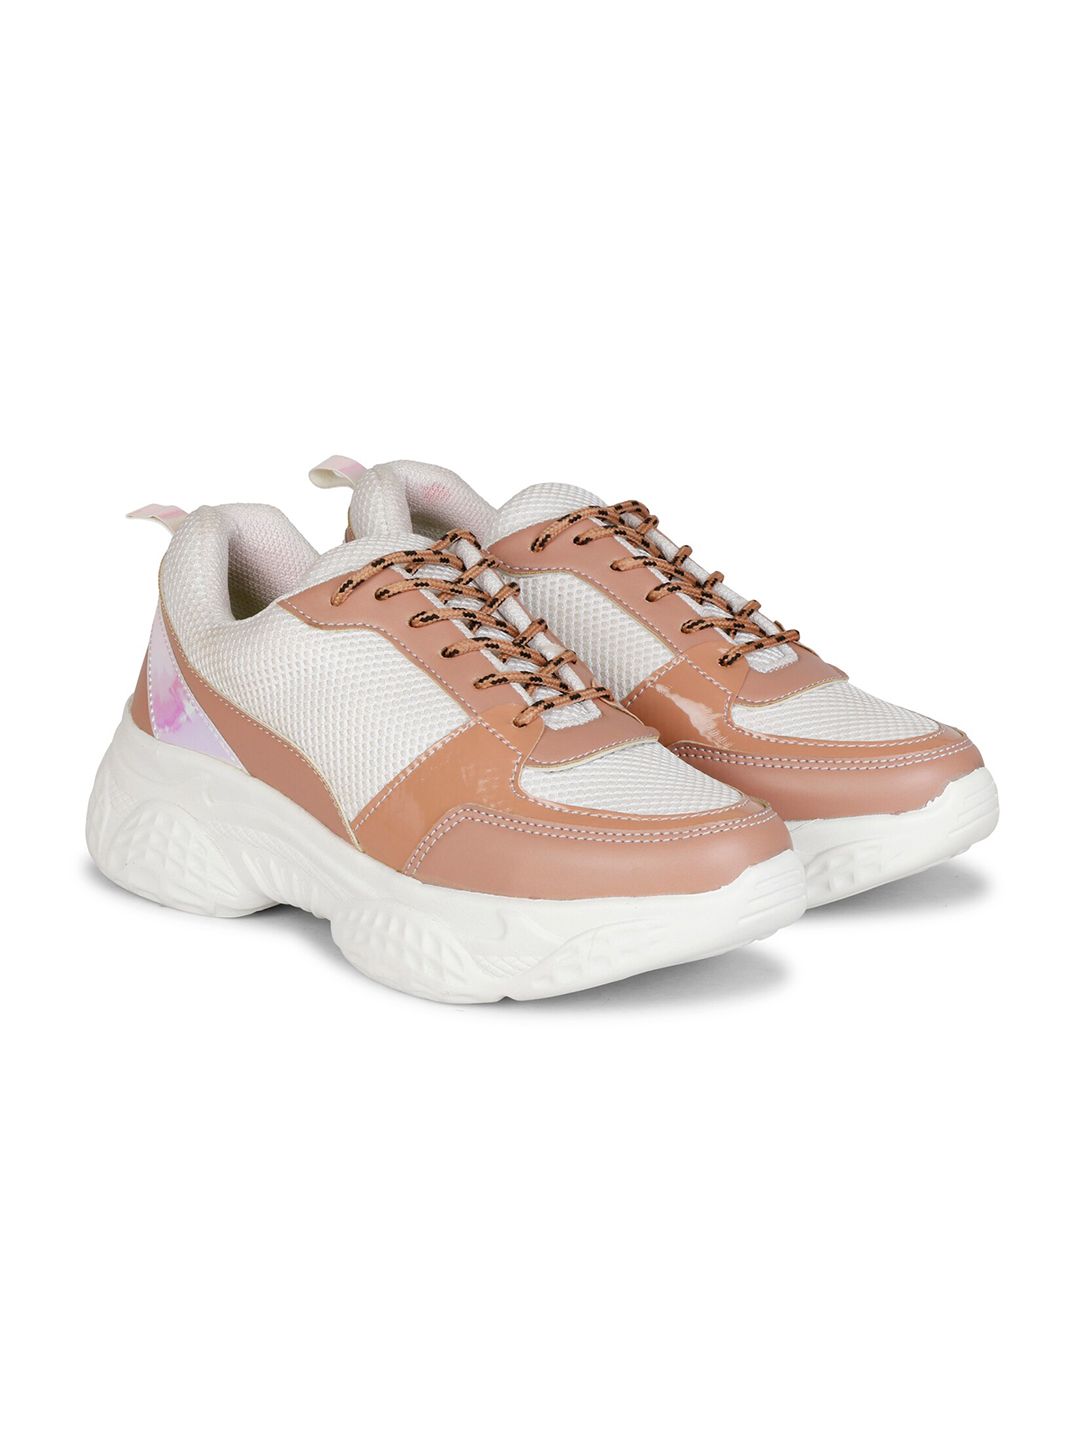 Denill Women Peach-Coloured Mesh Track Running Shoes Price in India